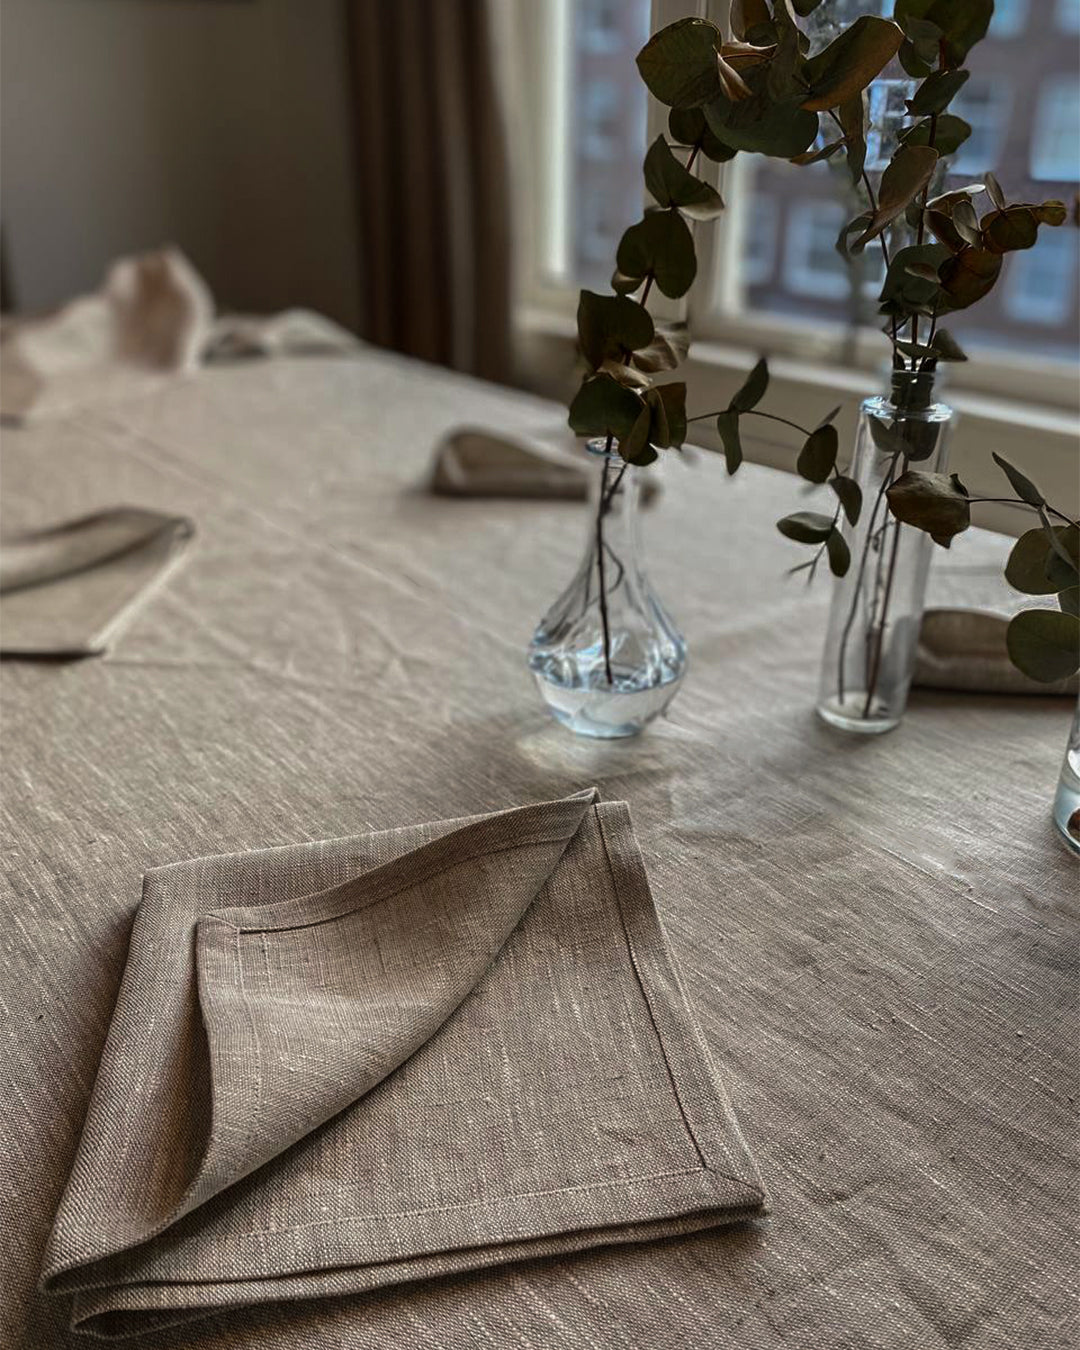 Tablecloth from rough natural linen